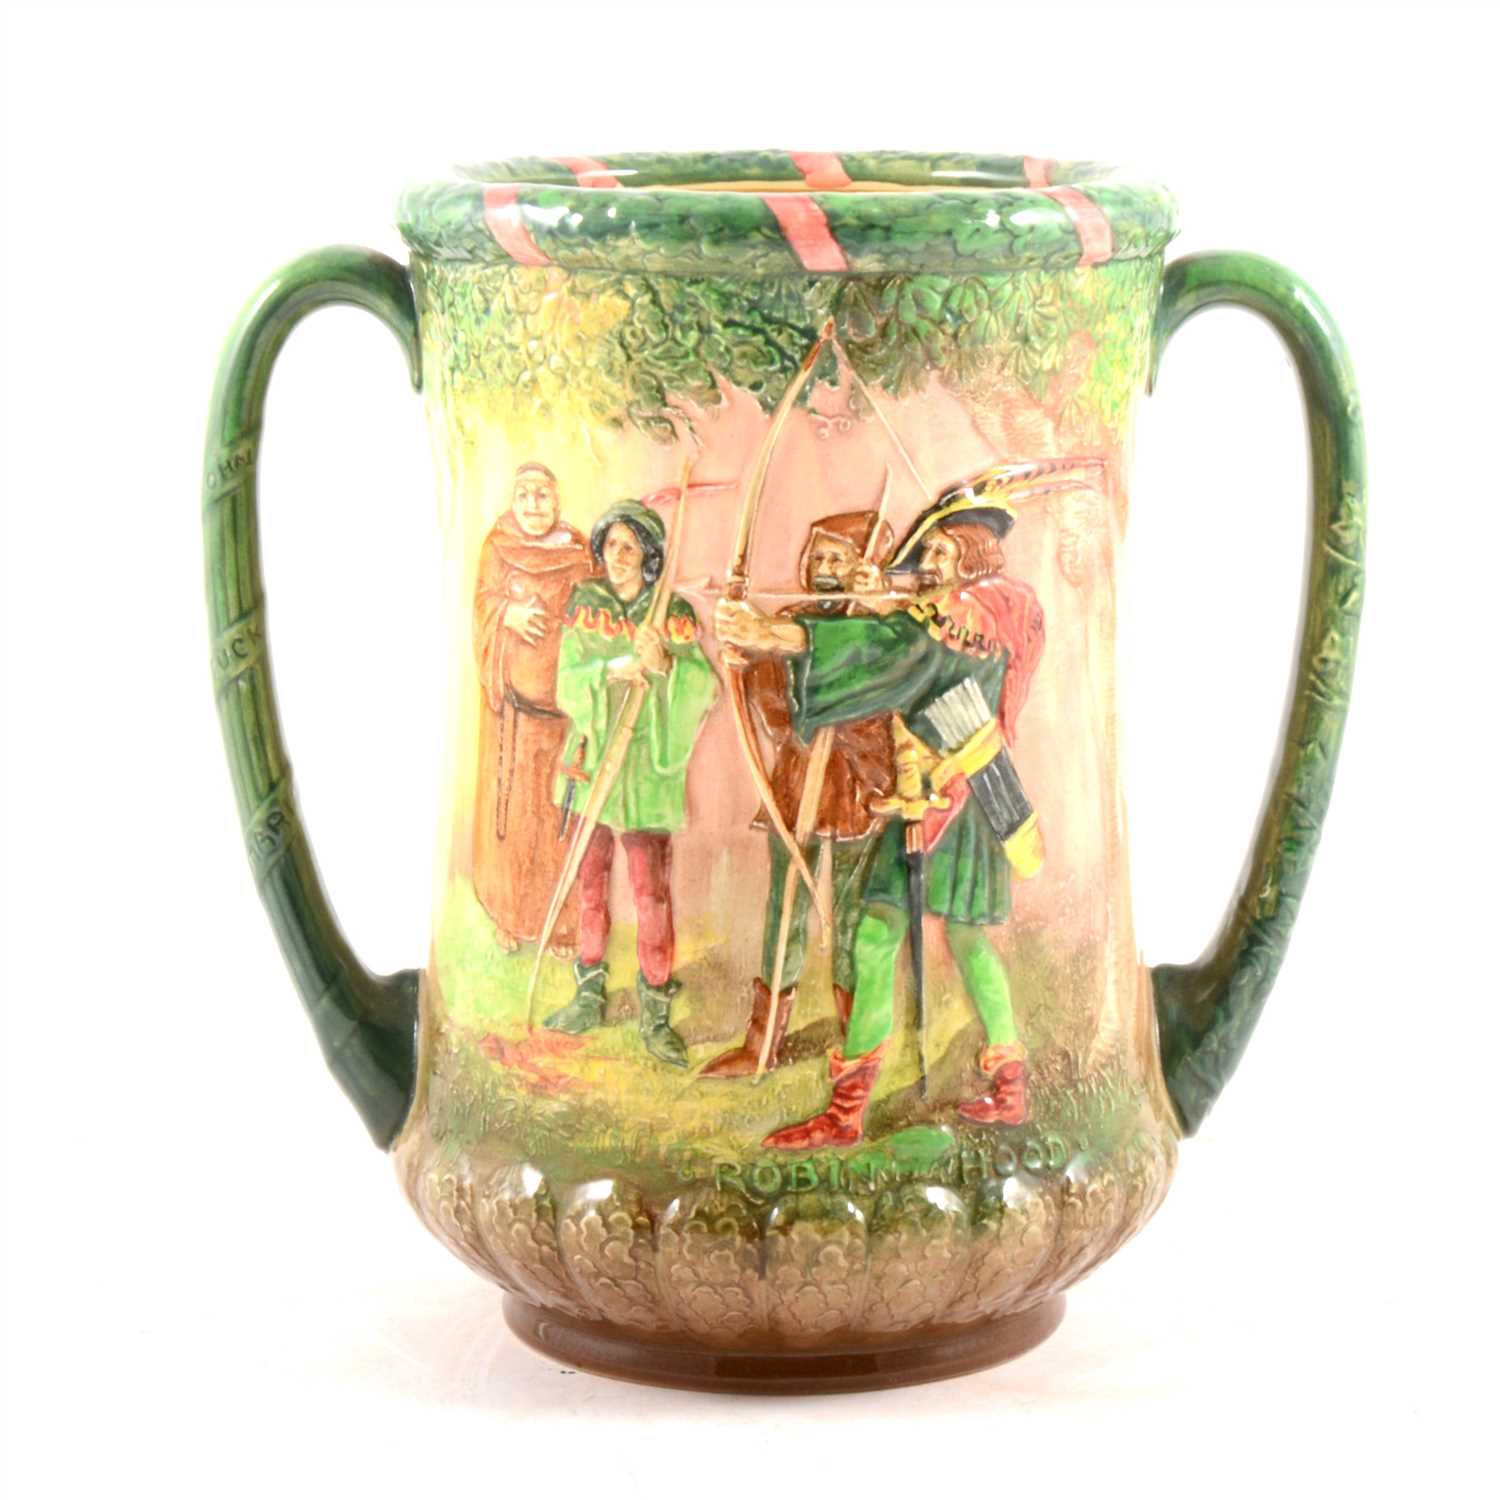 Lot 38 - A Royal Doulton twin handled loving cup, Robin Hood, number 26 of 600.